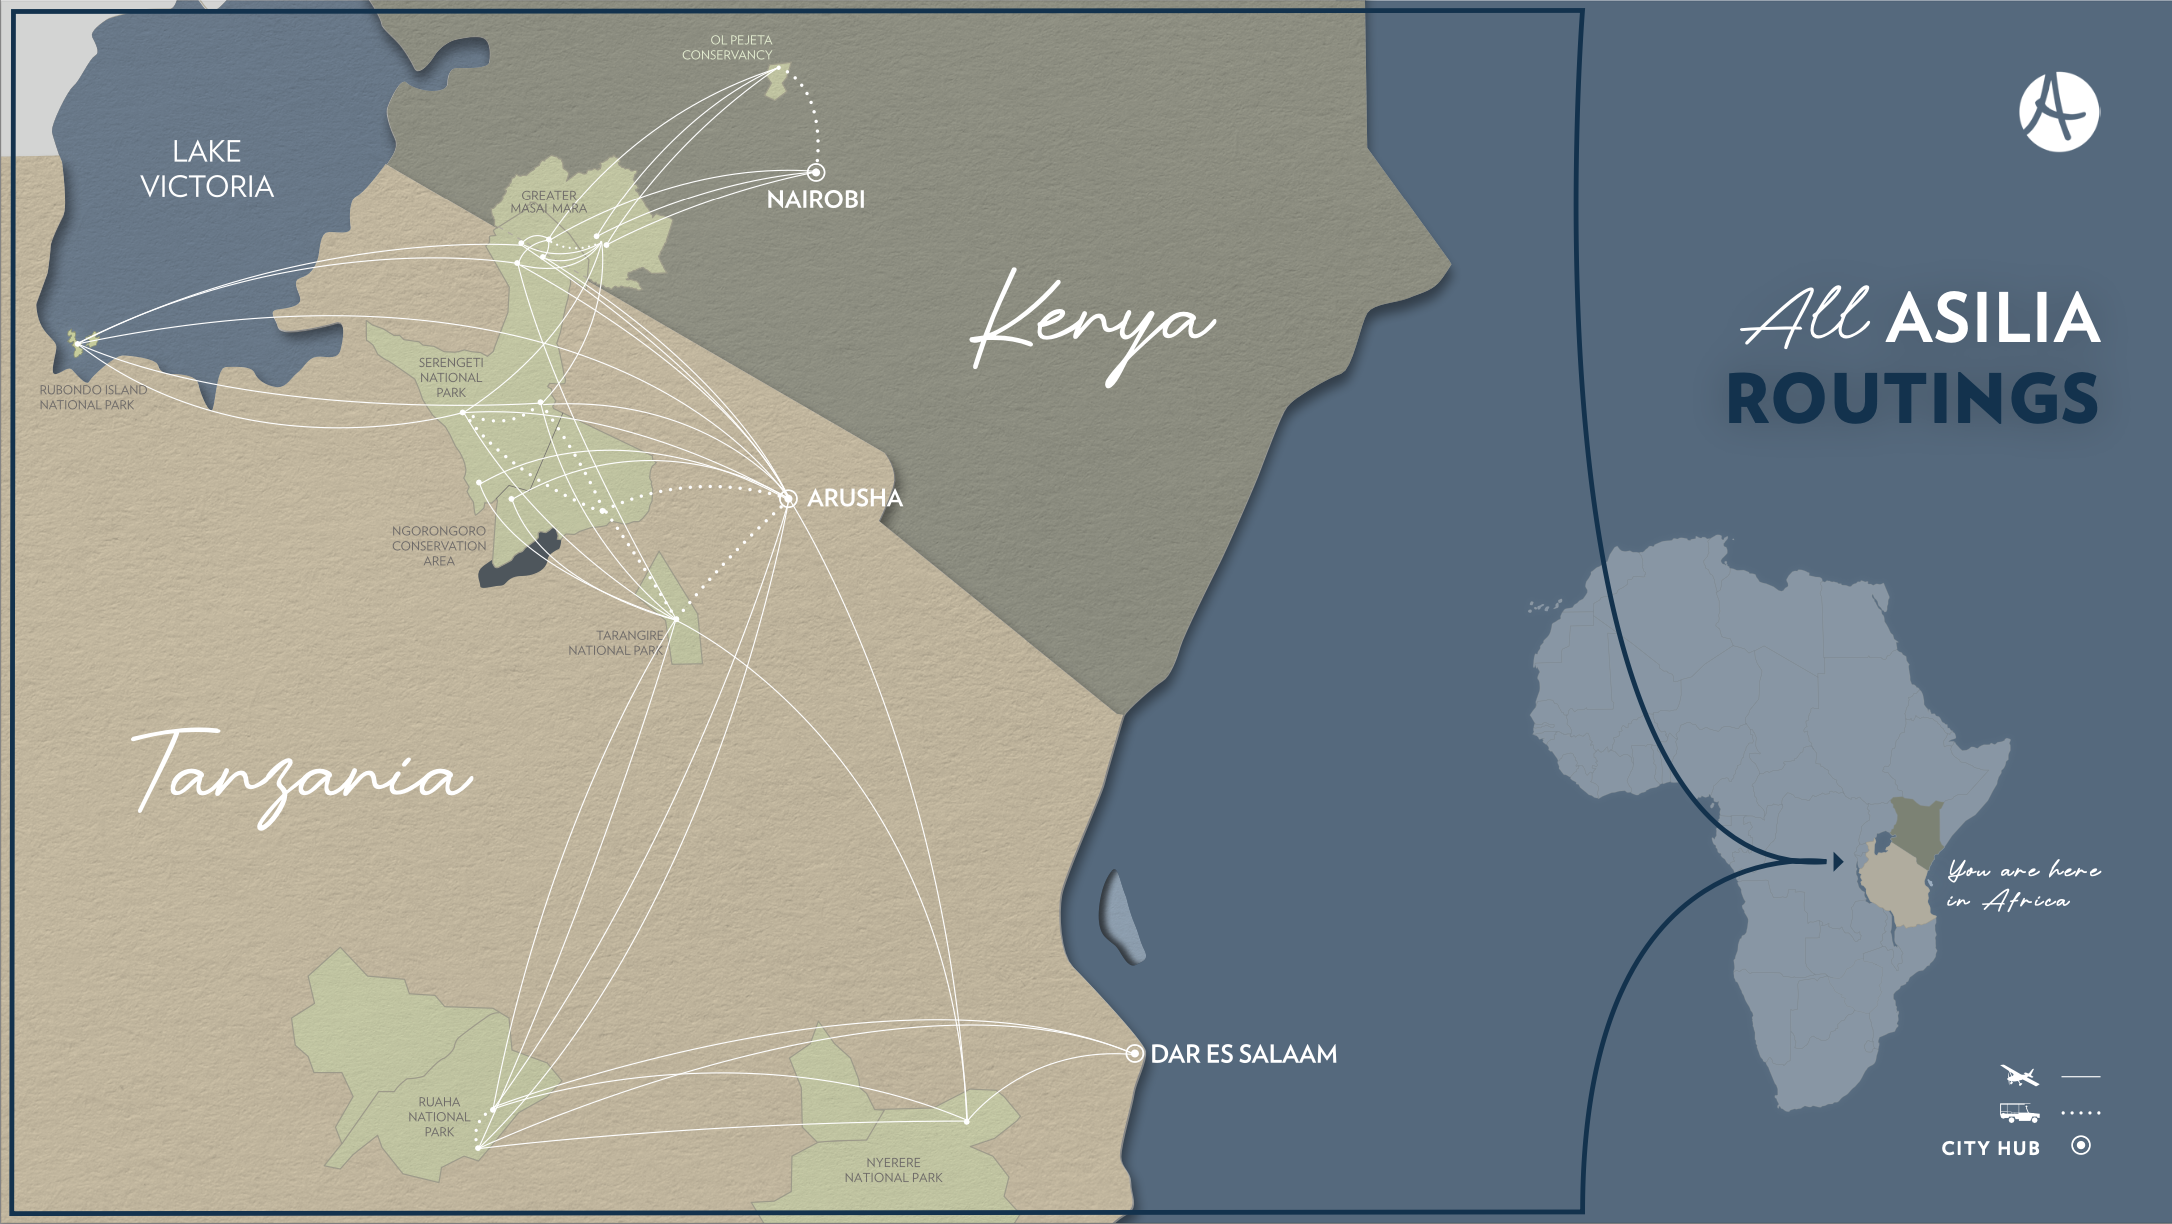 A map of Kenya and Tanzania showing all the possible routes available as part of the All Asilia offer